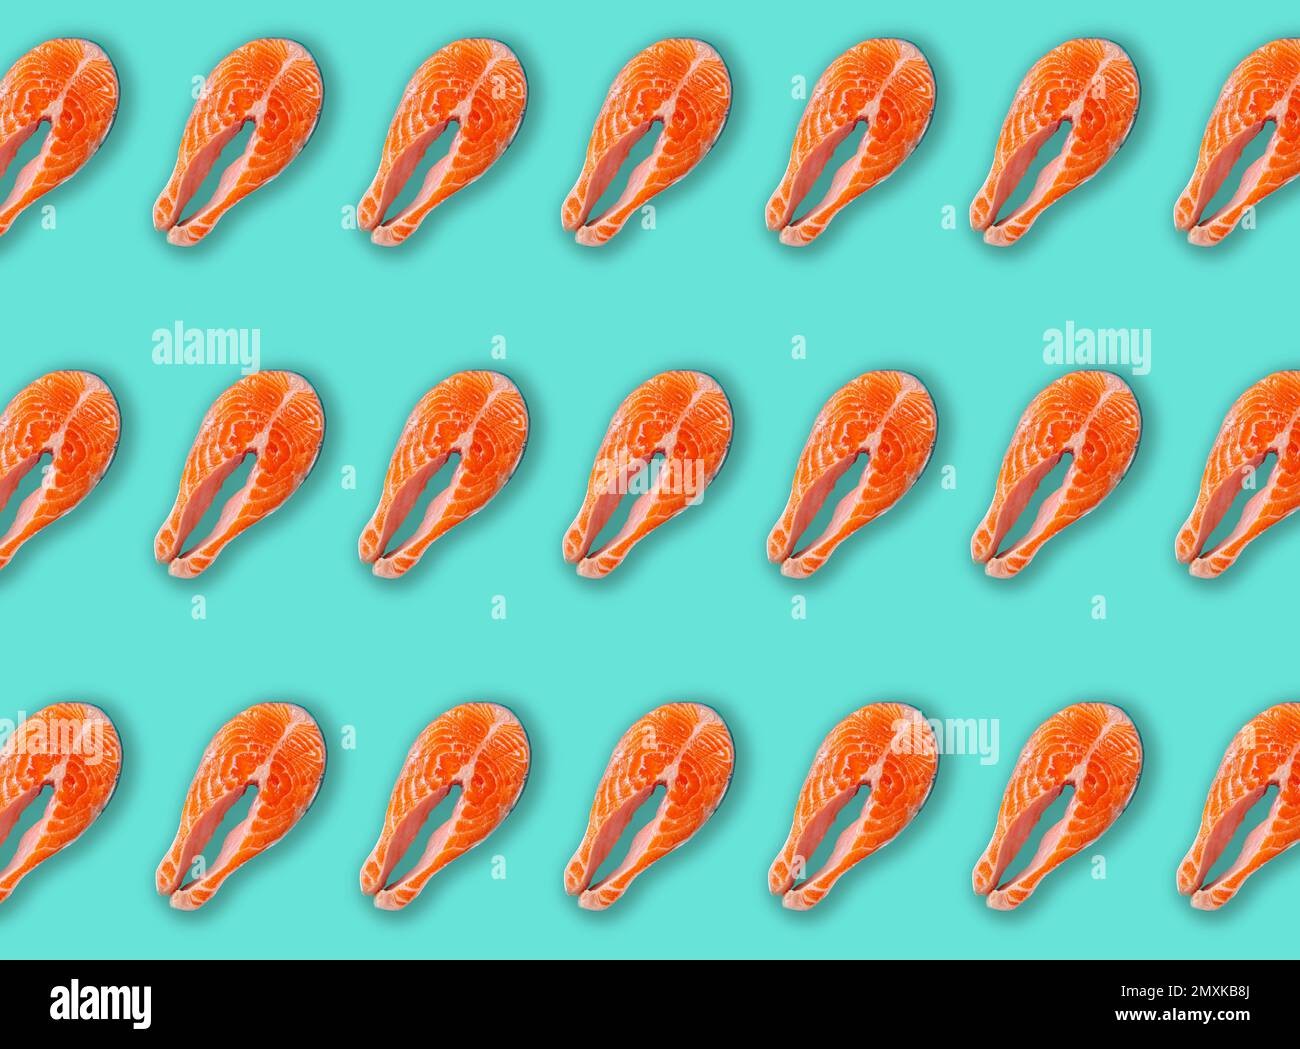 Minimalist pattern made of raw fresh fish salmon steak top view on blue clean background from above, delicacy healthy fish eating and nutrition concep Stock Photo